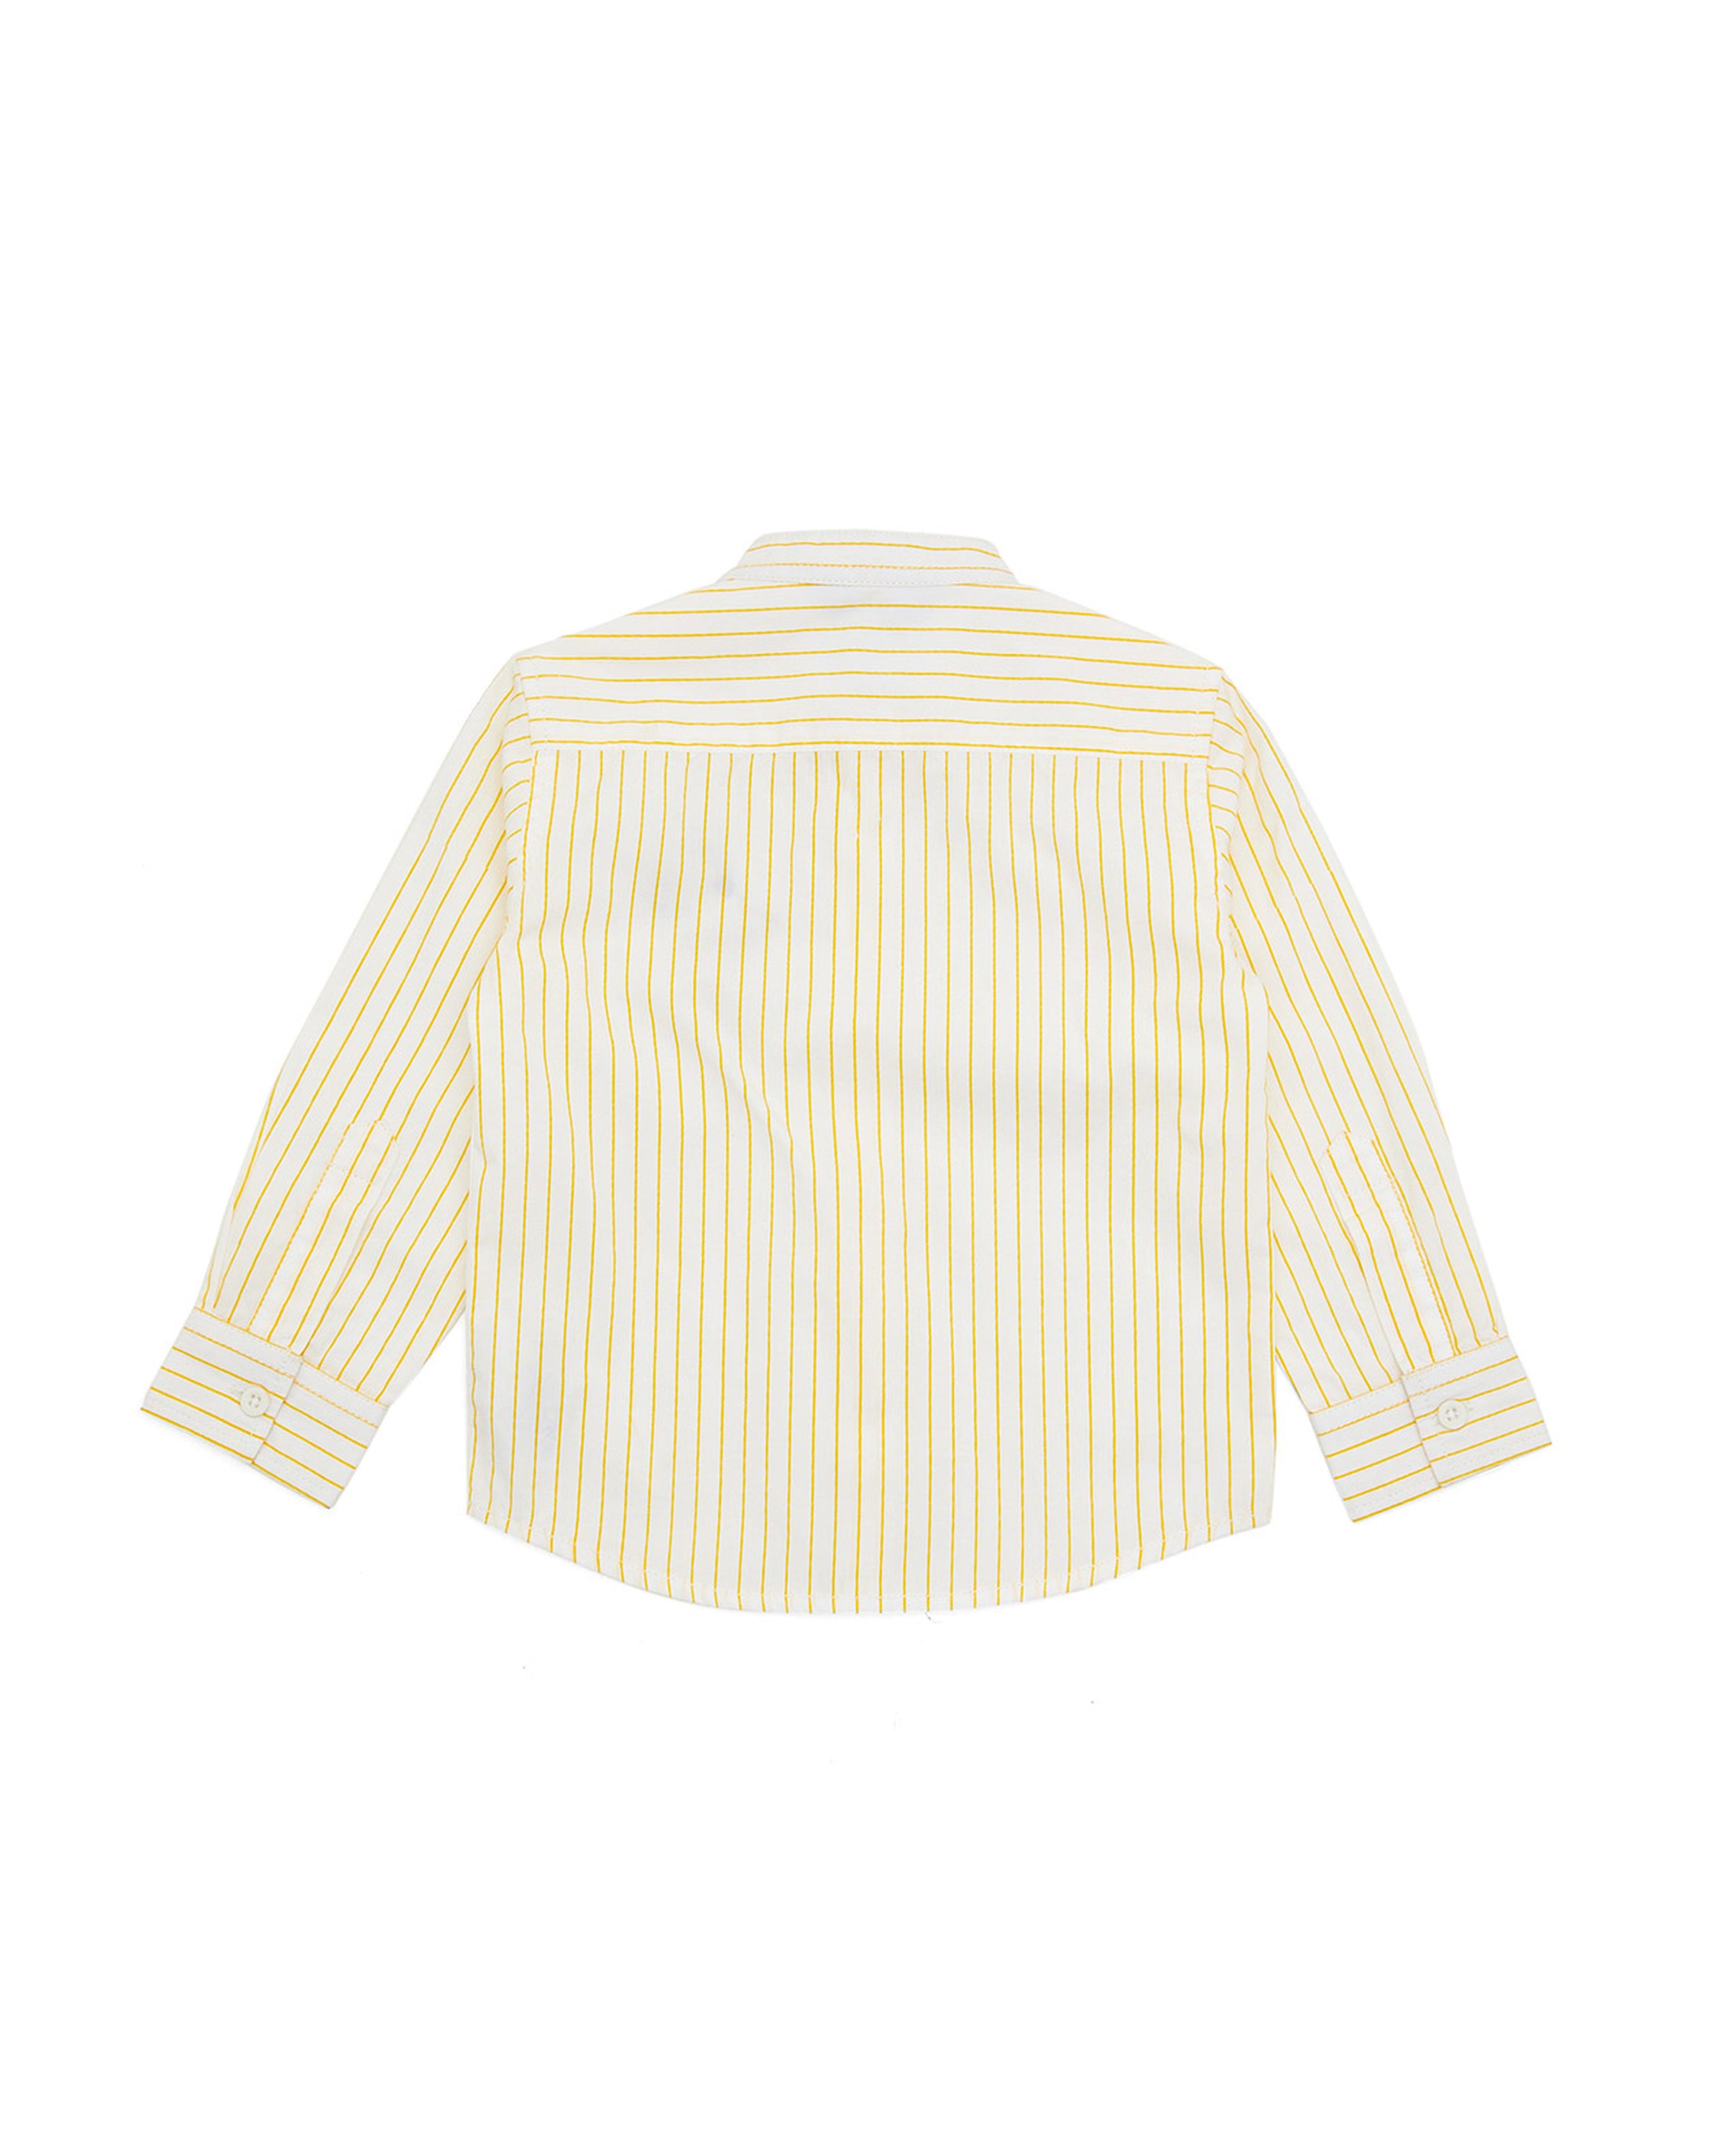 Striped Shirt with Classic Collar and Short Sleeves